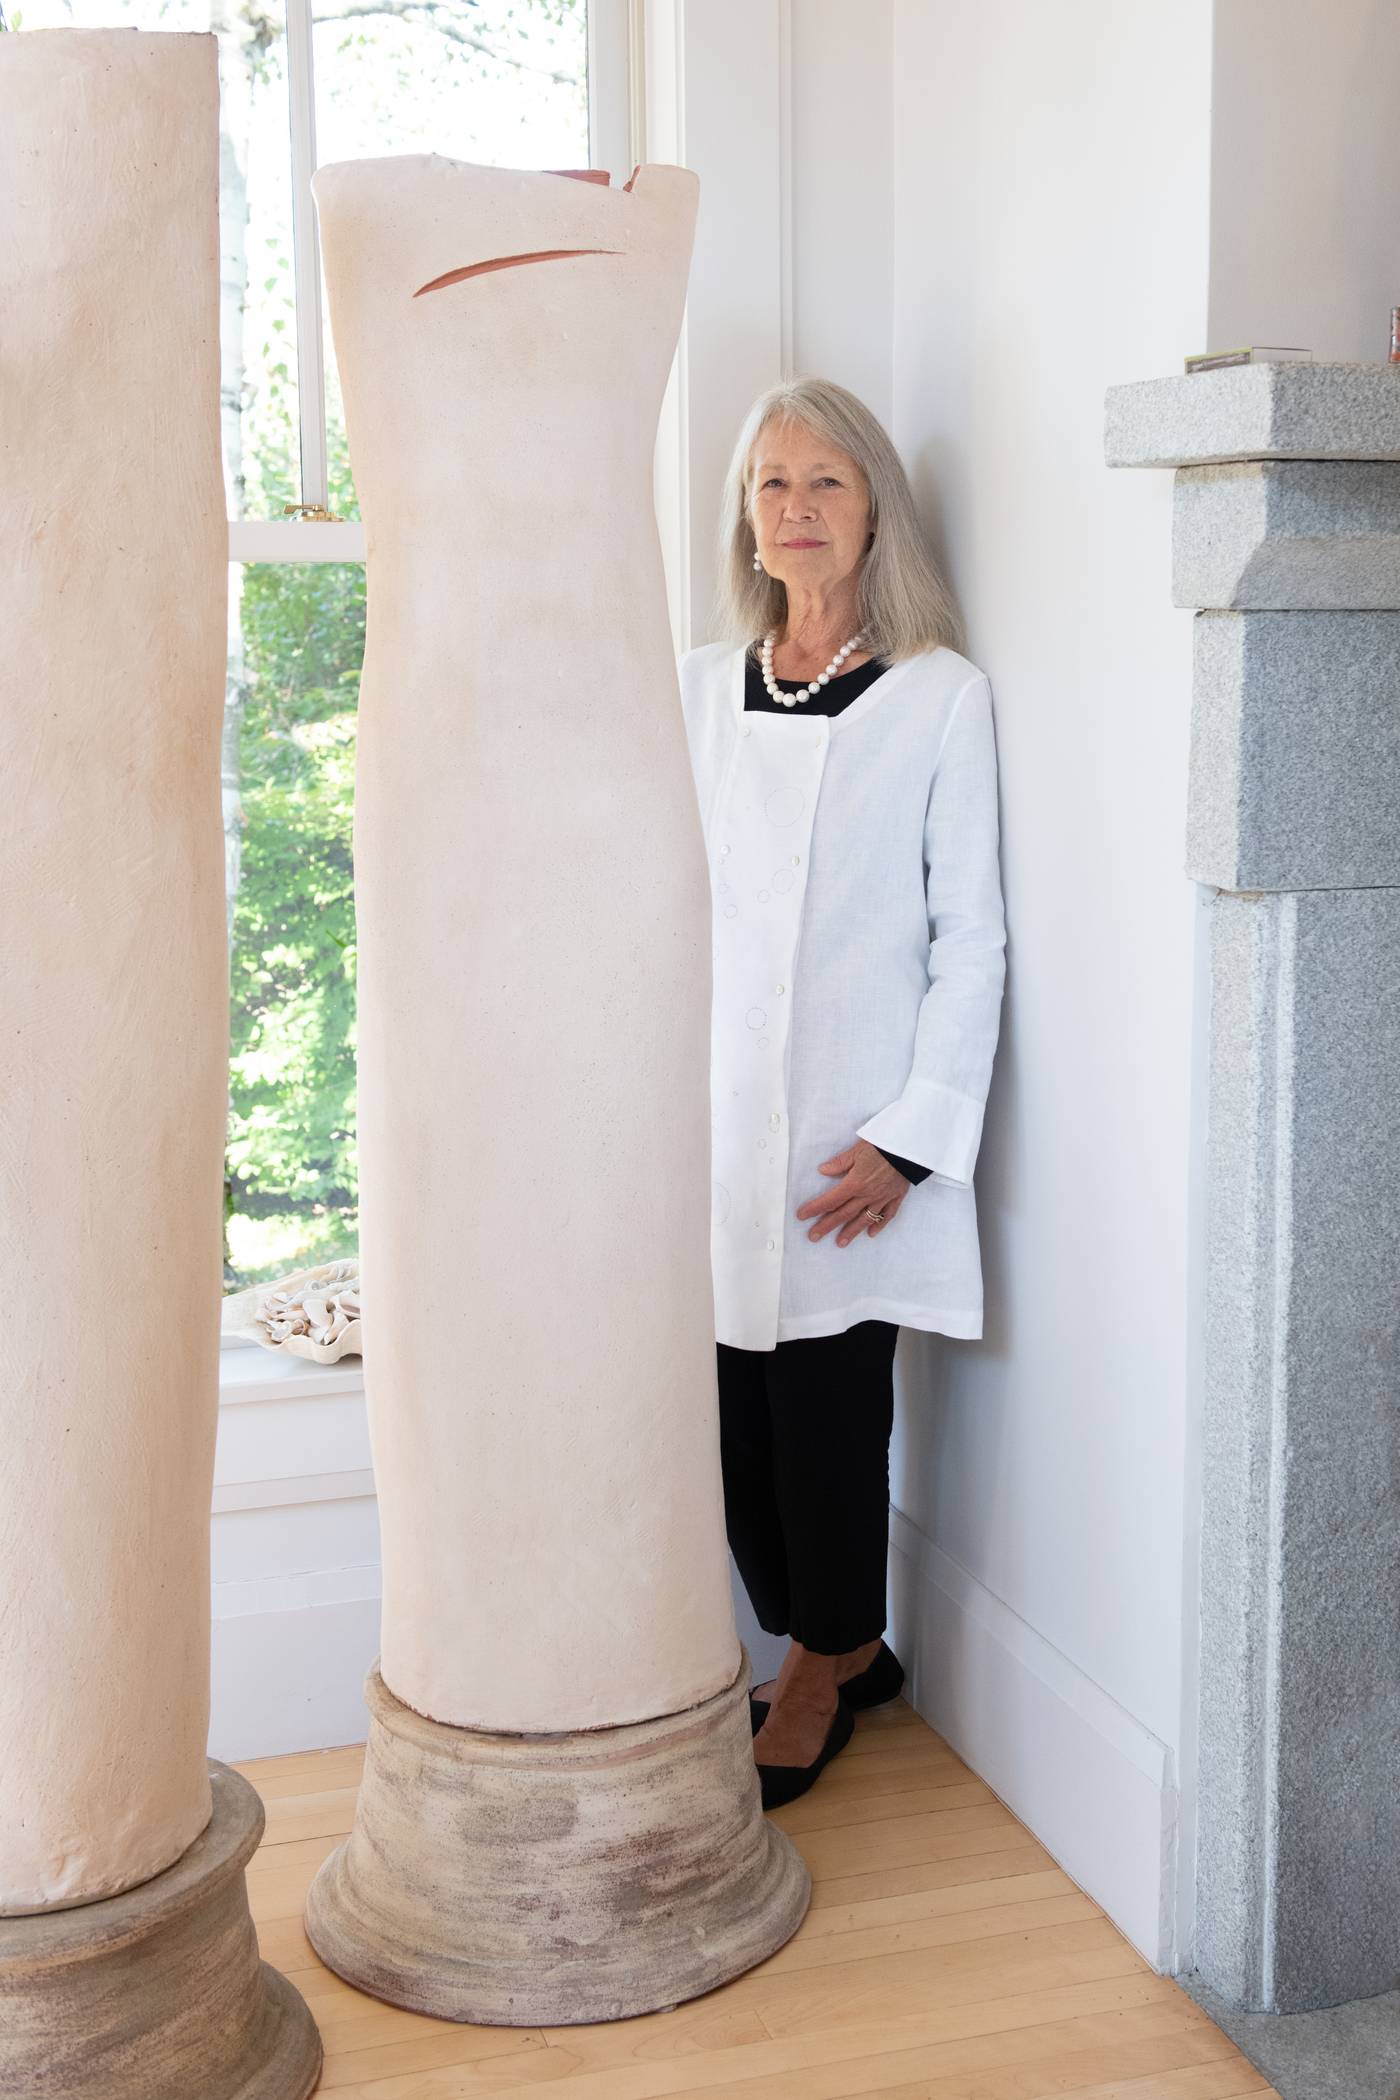 June in the white Medulla tunic, standing next to the ceramic “TreeForms” sculpture by Sharon Townshend